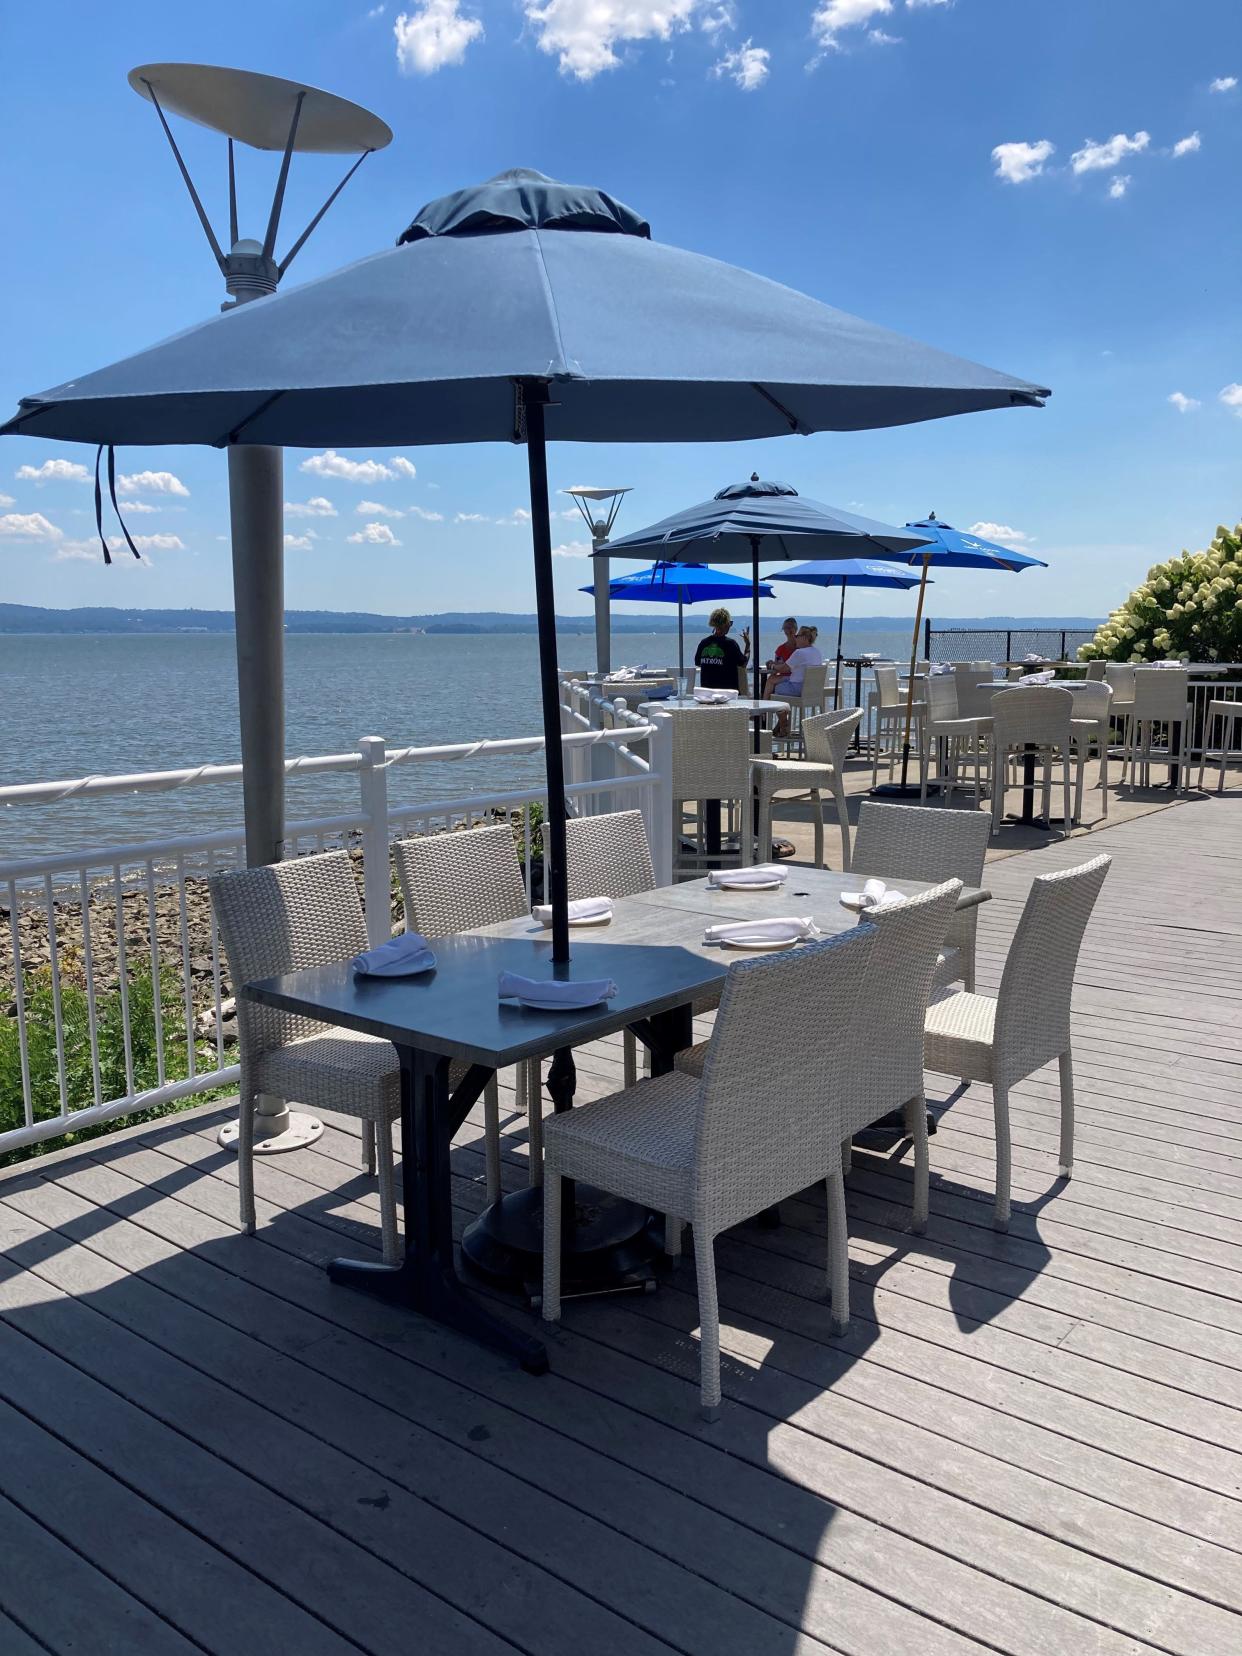 Alfresco dining - with a water view -- can be found at Hudson Water Club in Haverstraw. Photographed July 2022